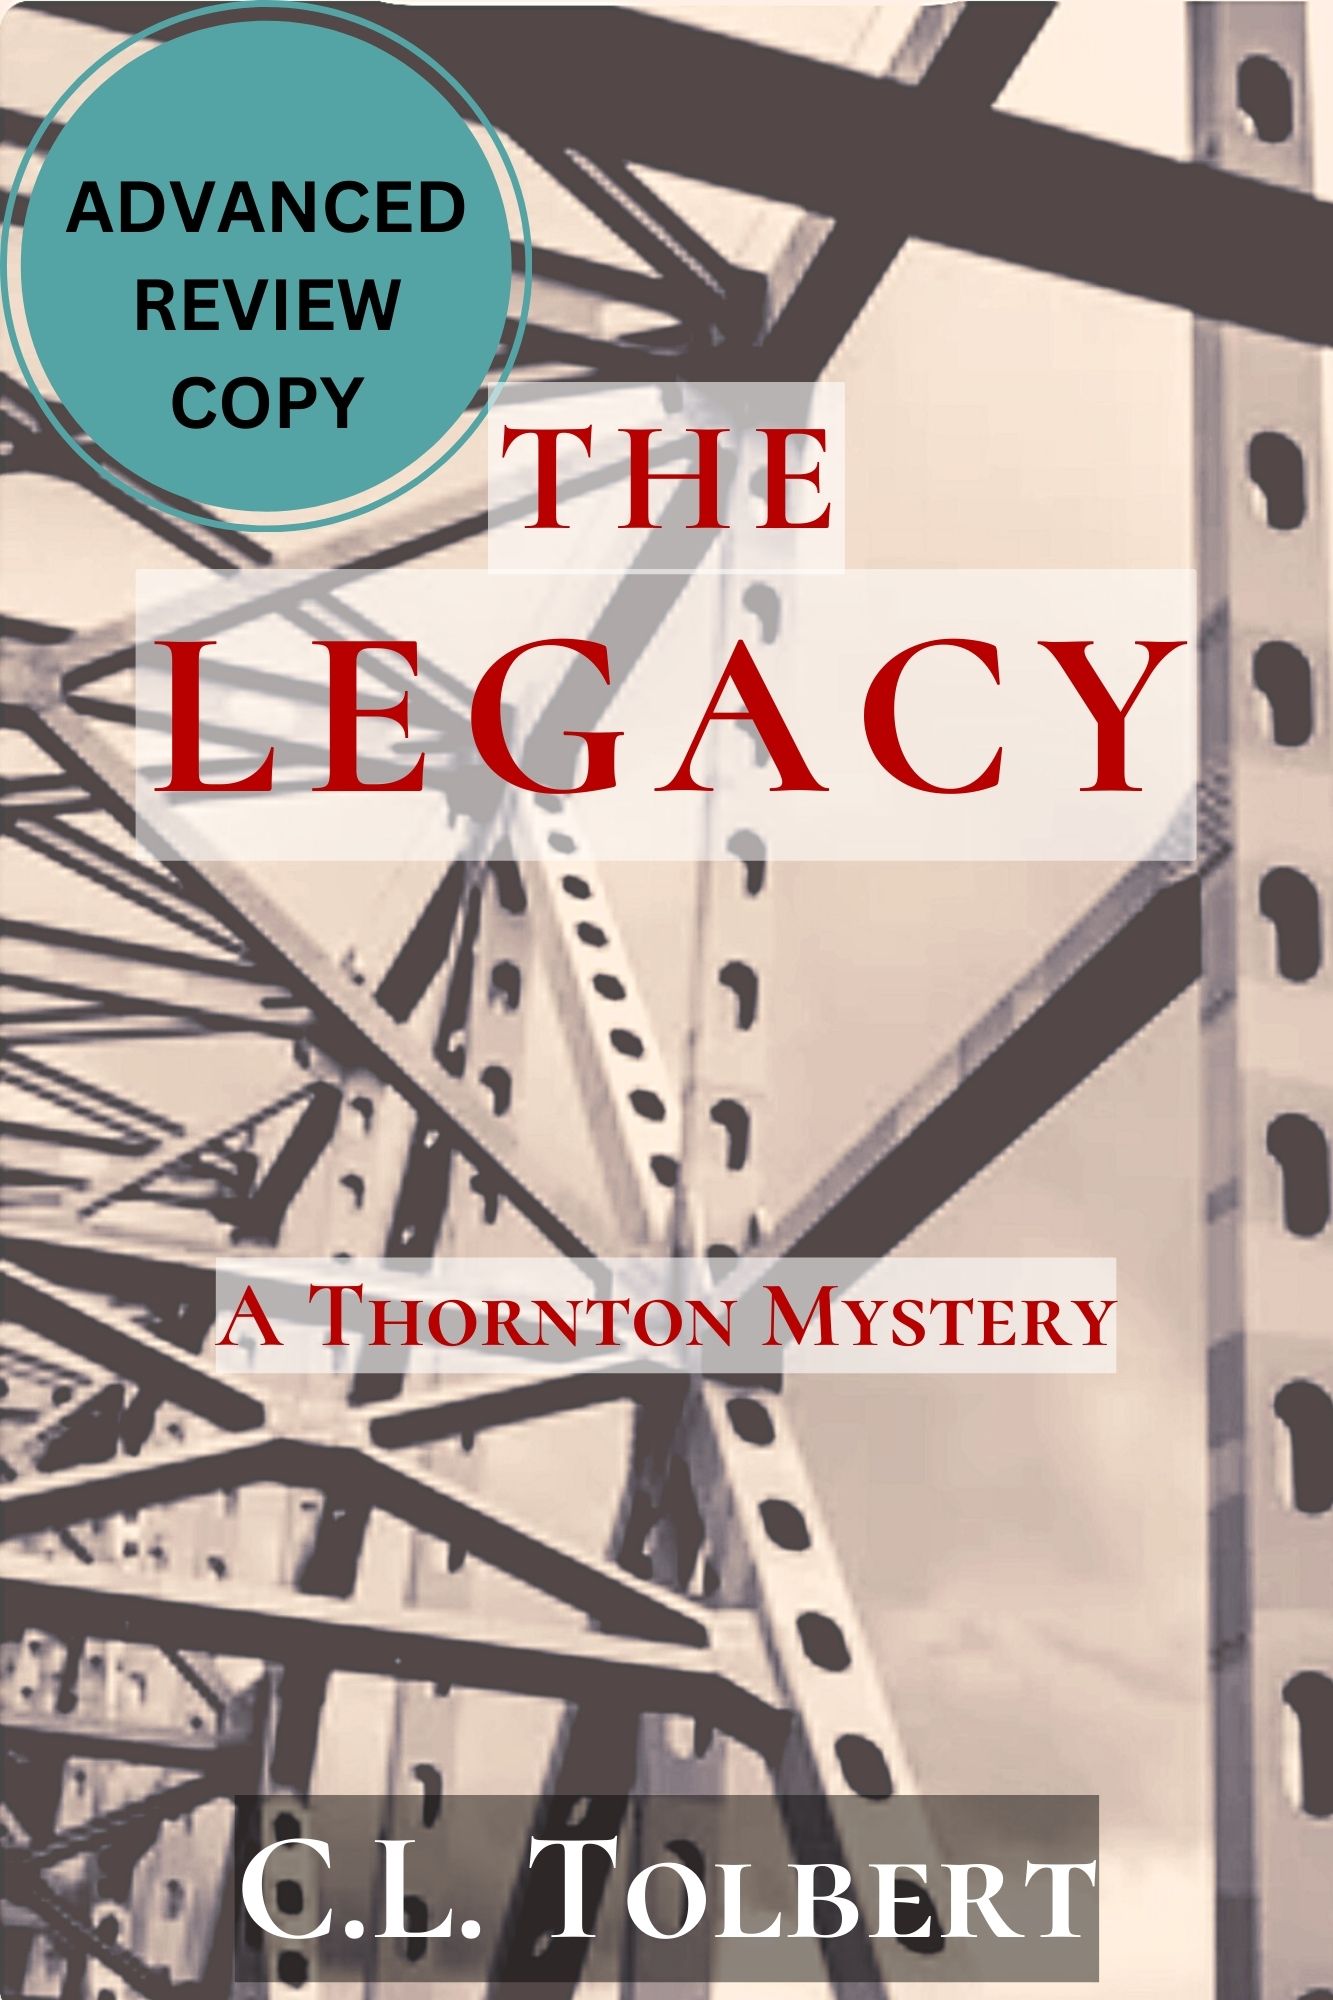 The Legacy by C. L. Tolbert